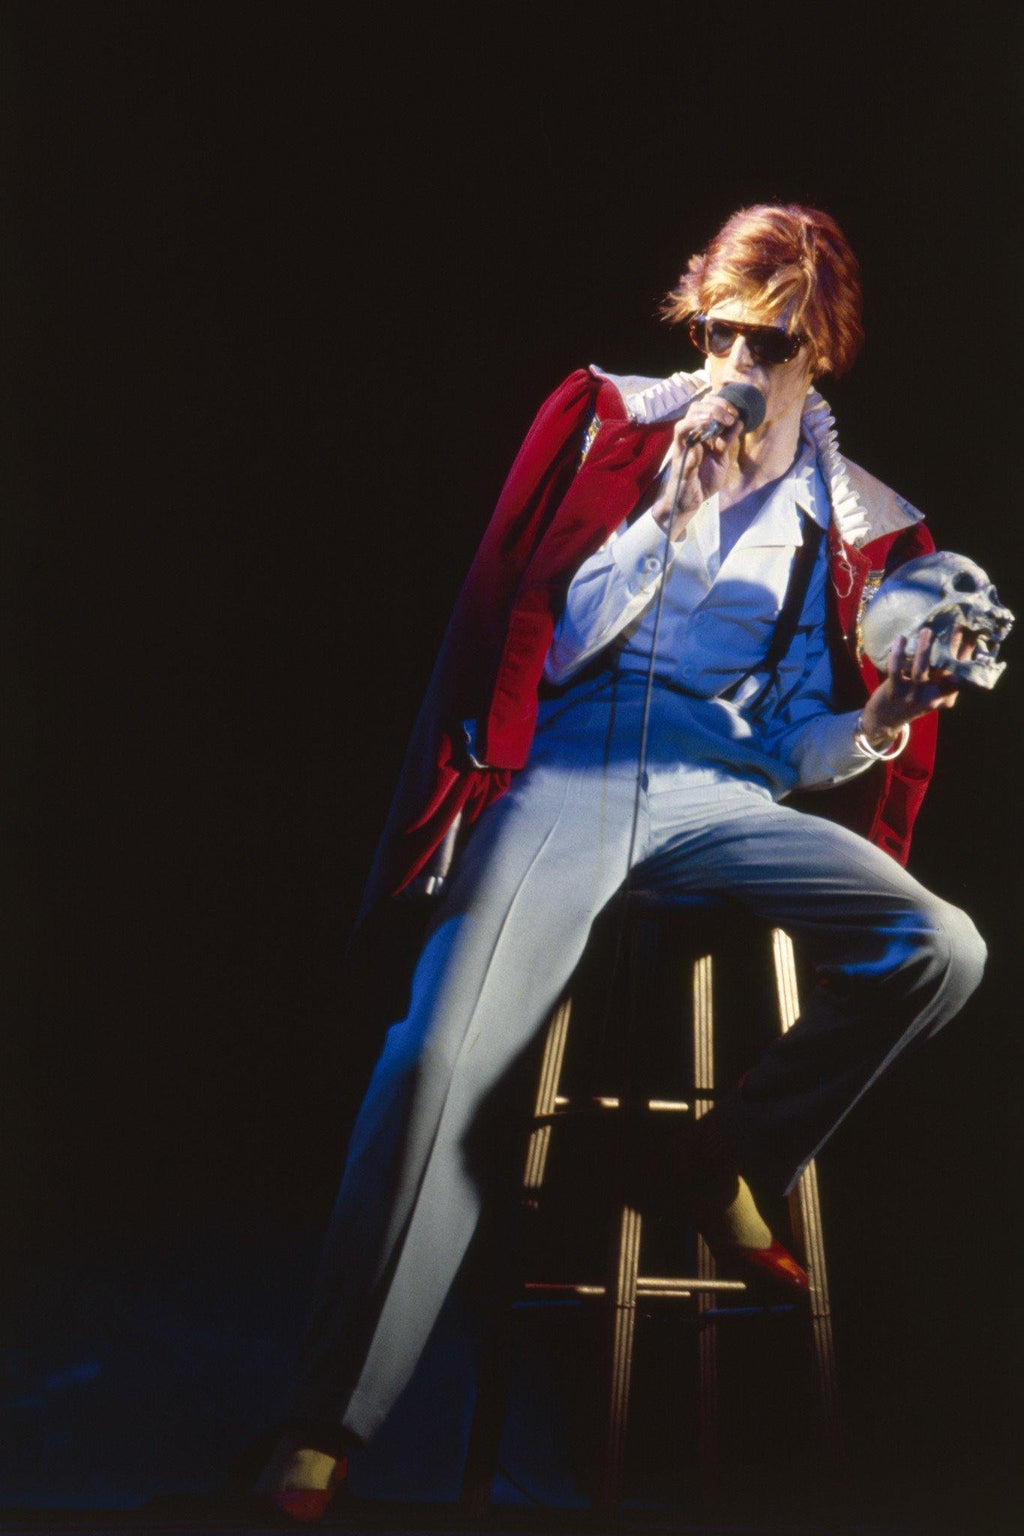 David Bowie, By Terry O'Neill.  LA MAISON REBELLE